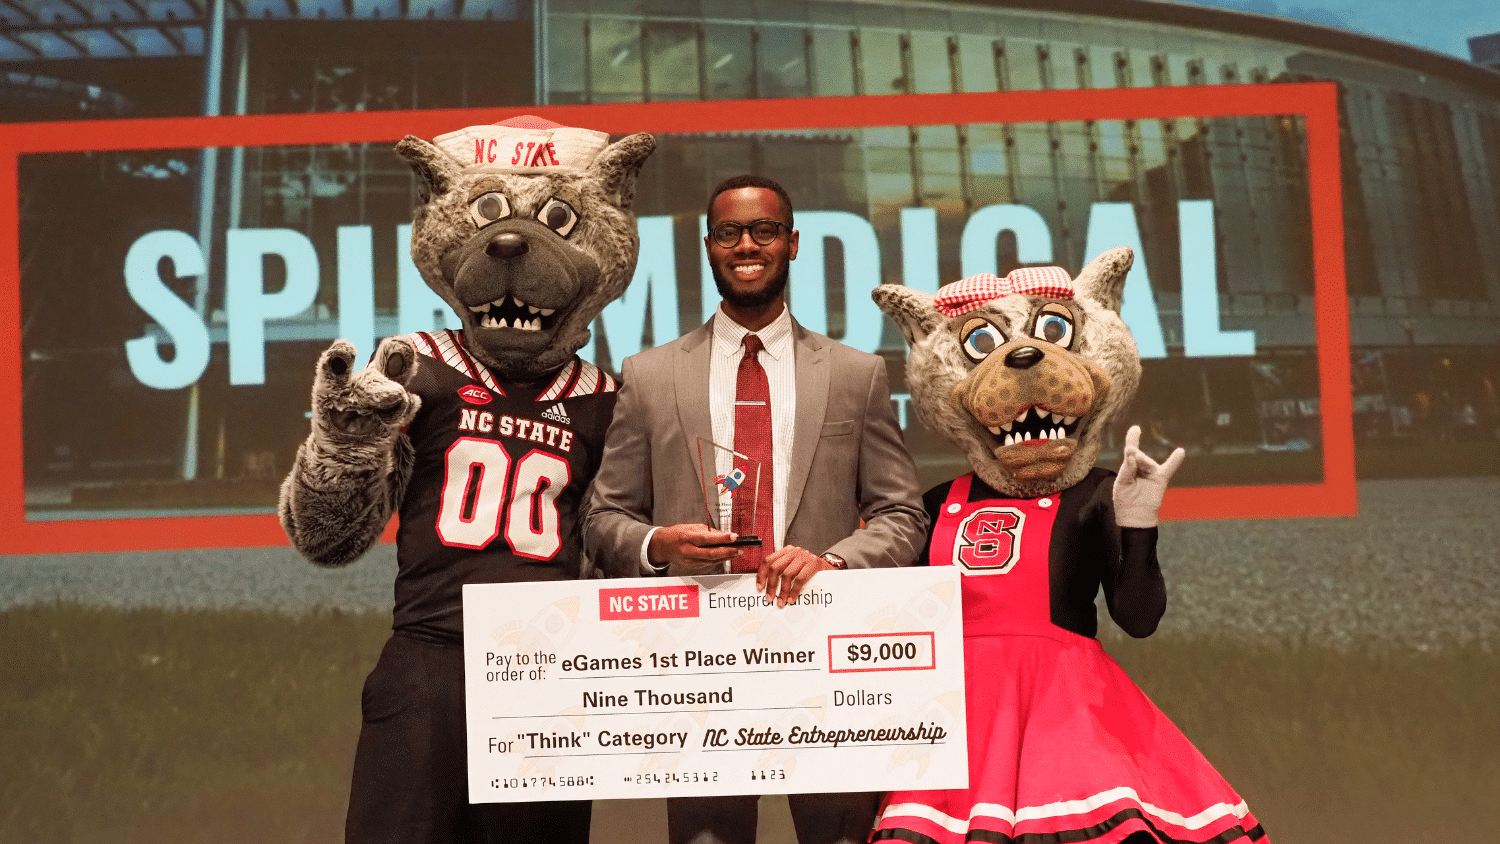 The 2022 eGames winner receives his cash prize with Mr. and Ms. Wuf on either side.